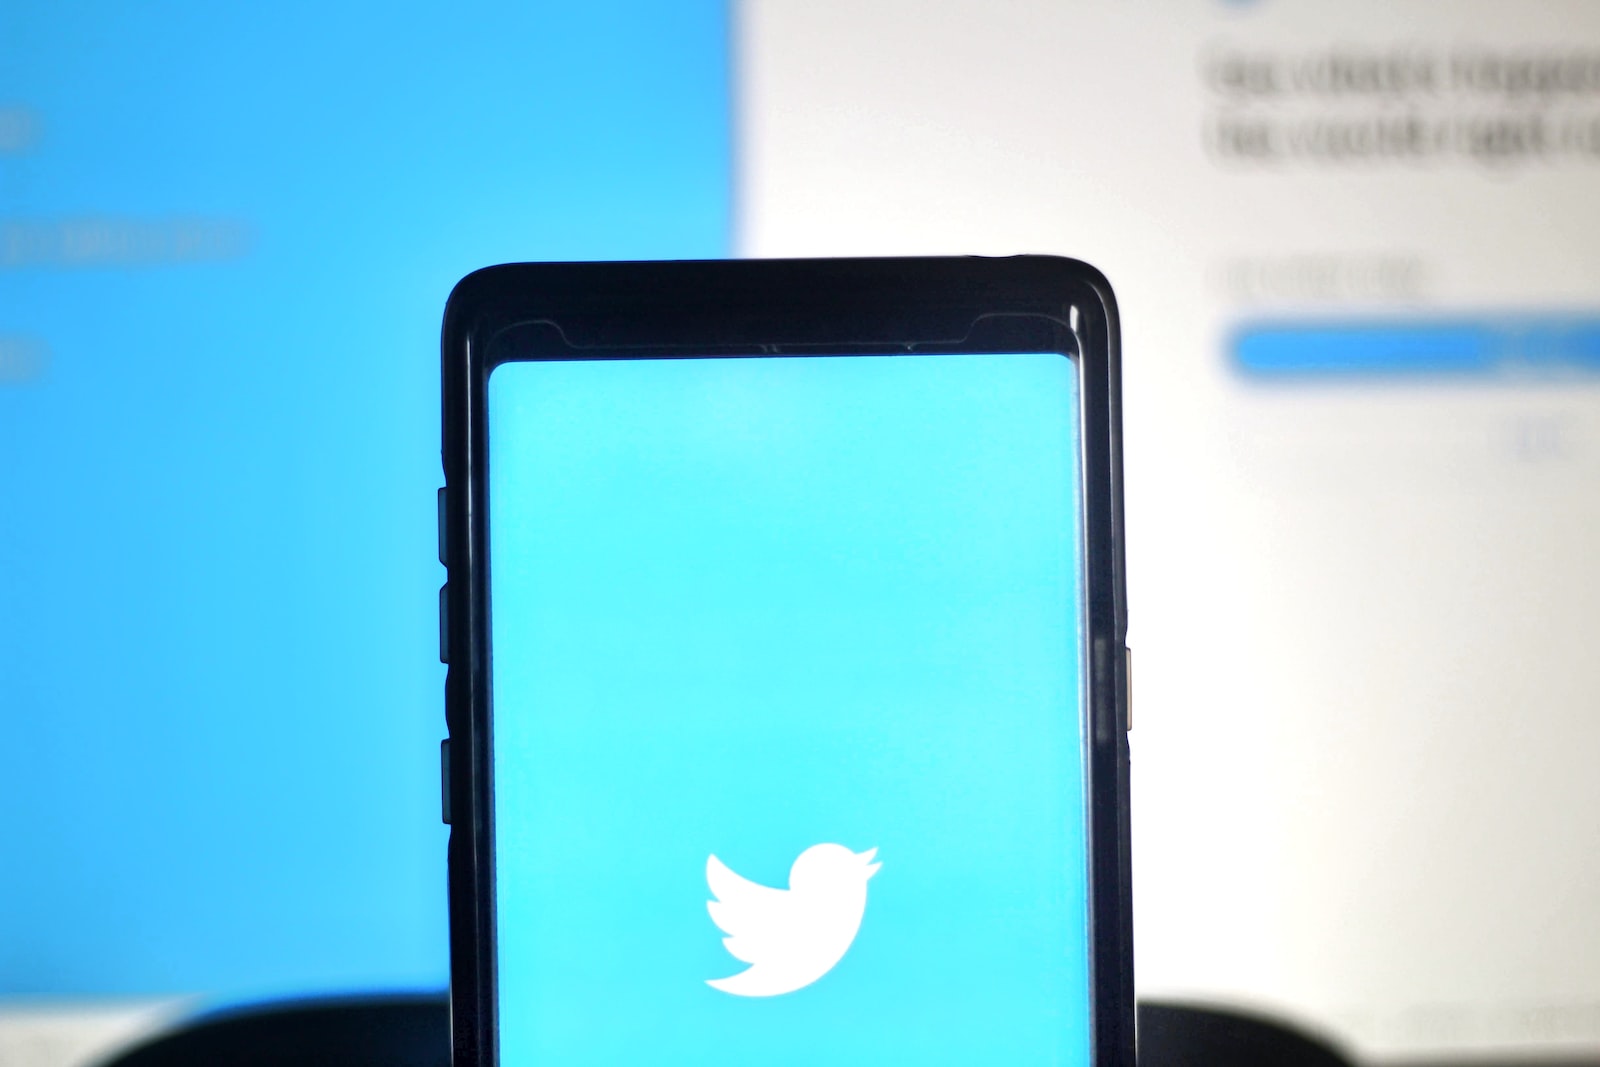 How to Scrape a Twitter Timeline